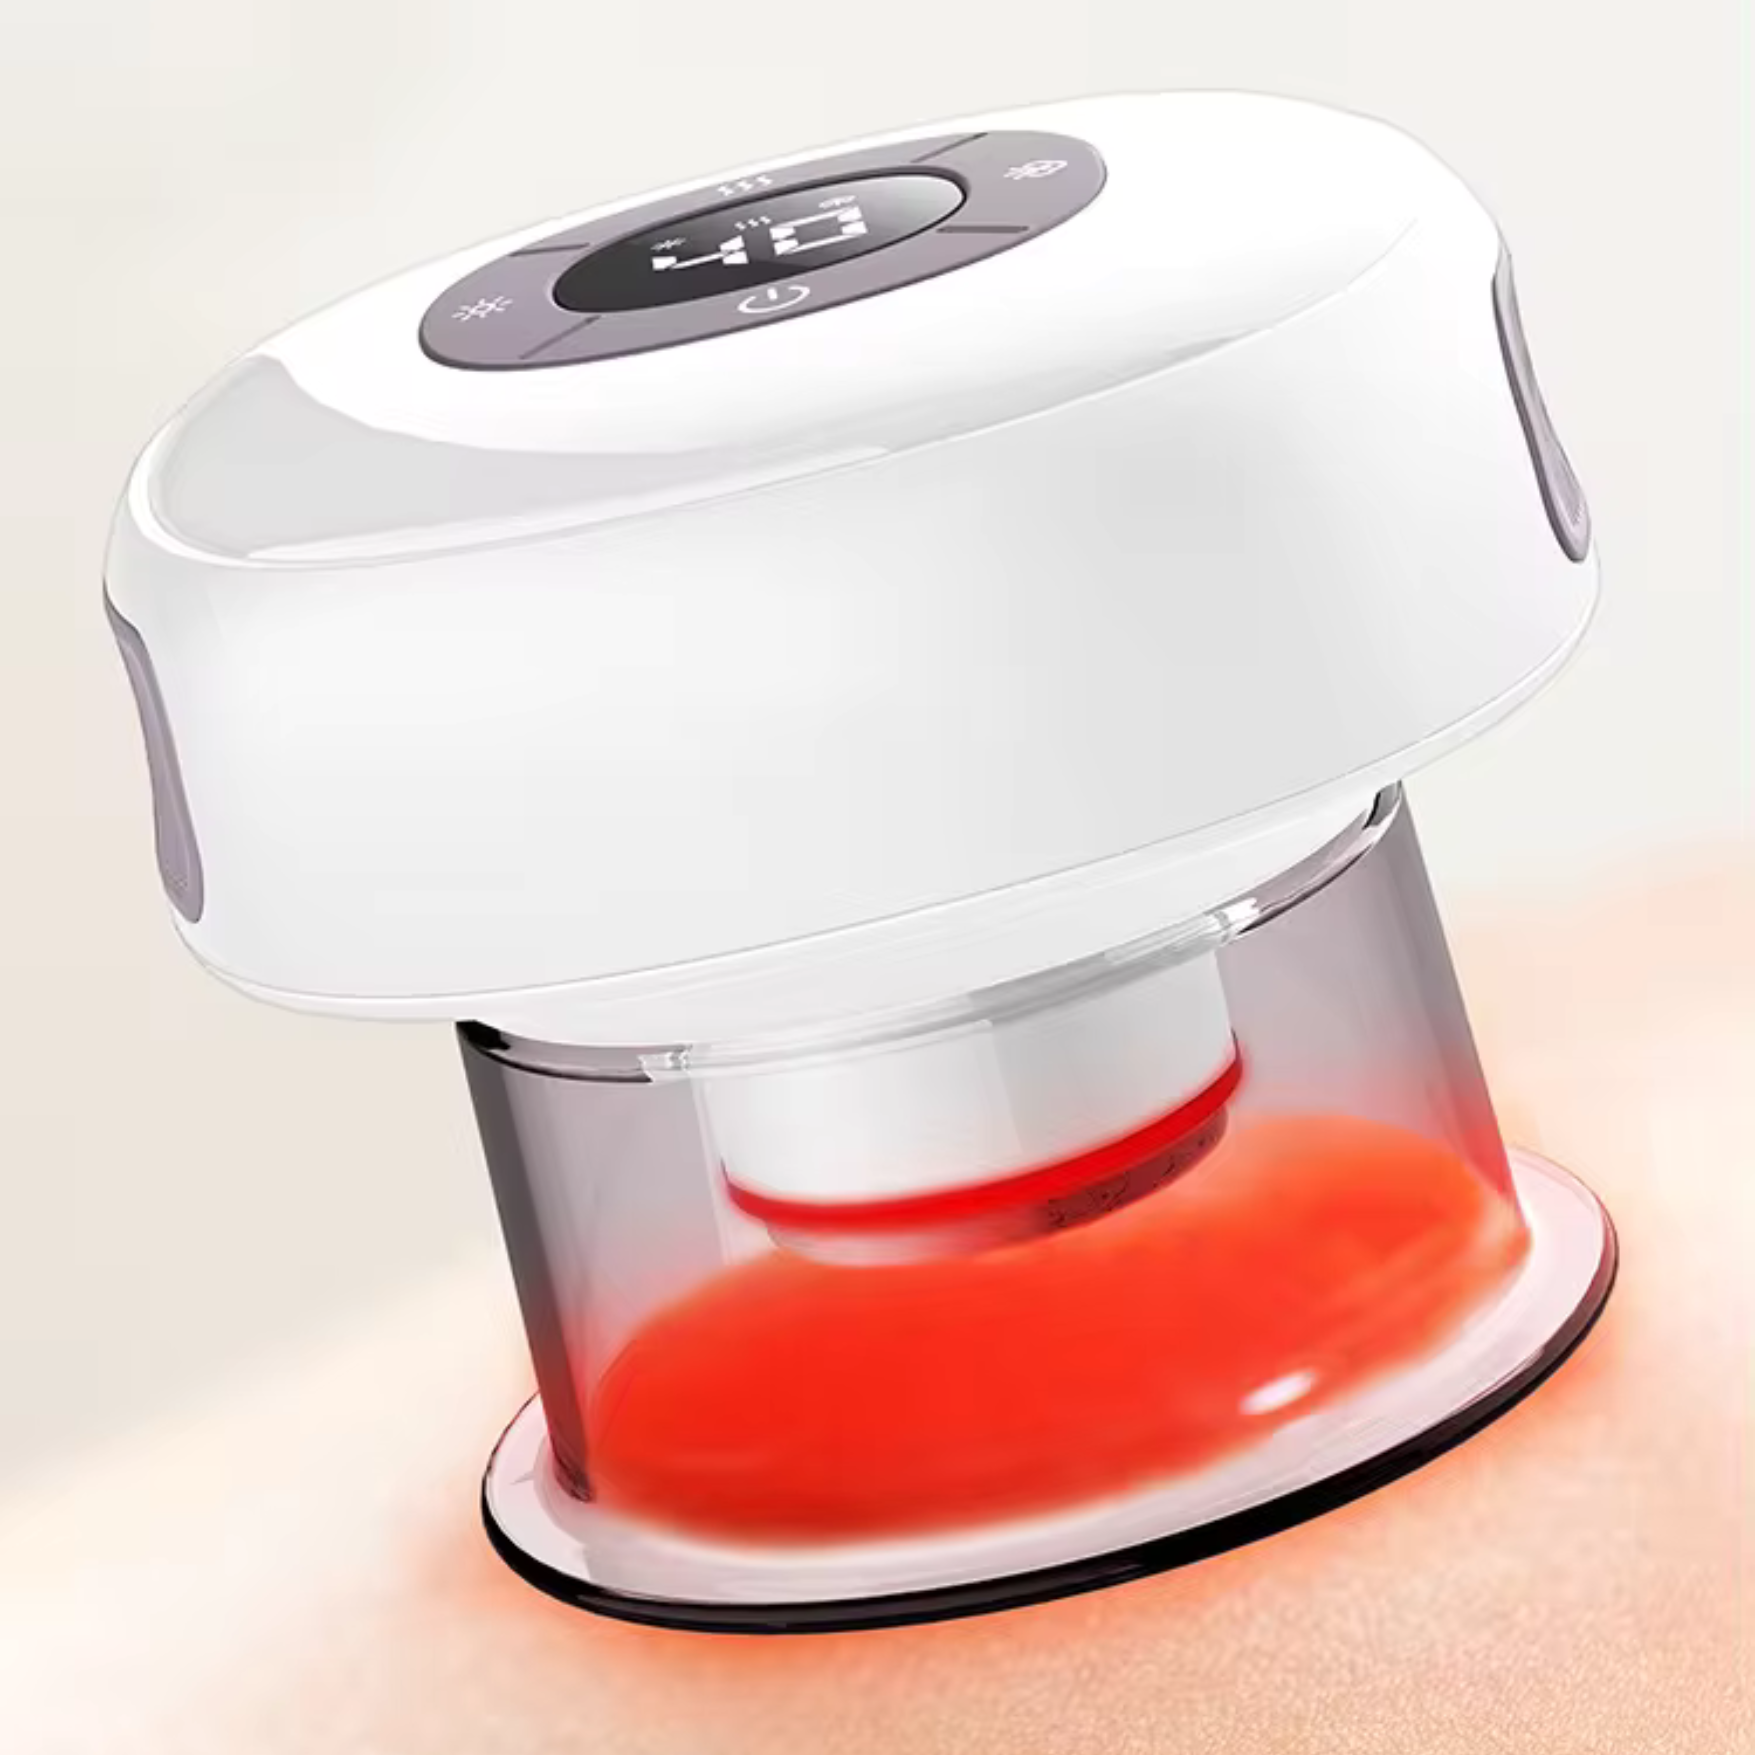 Image of NuLYFF™ Intelligent Cupping device leverages dynamic-suction technology, therapeutic heat, and adjustable red light therapy to Relieve painful knots & aches, increase blood flow & joint mobility, and improve muscle recovery.